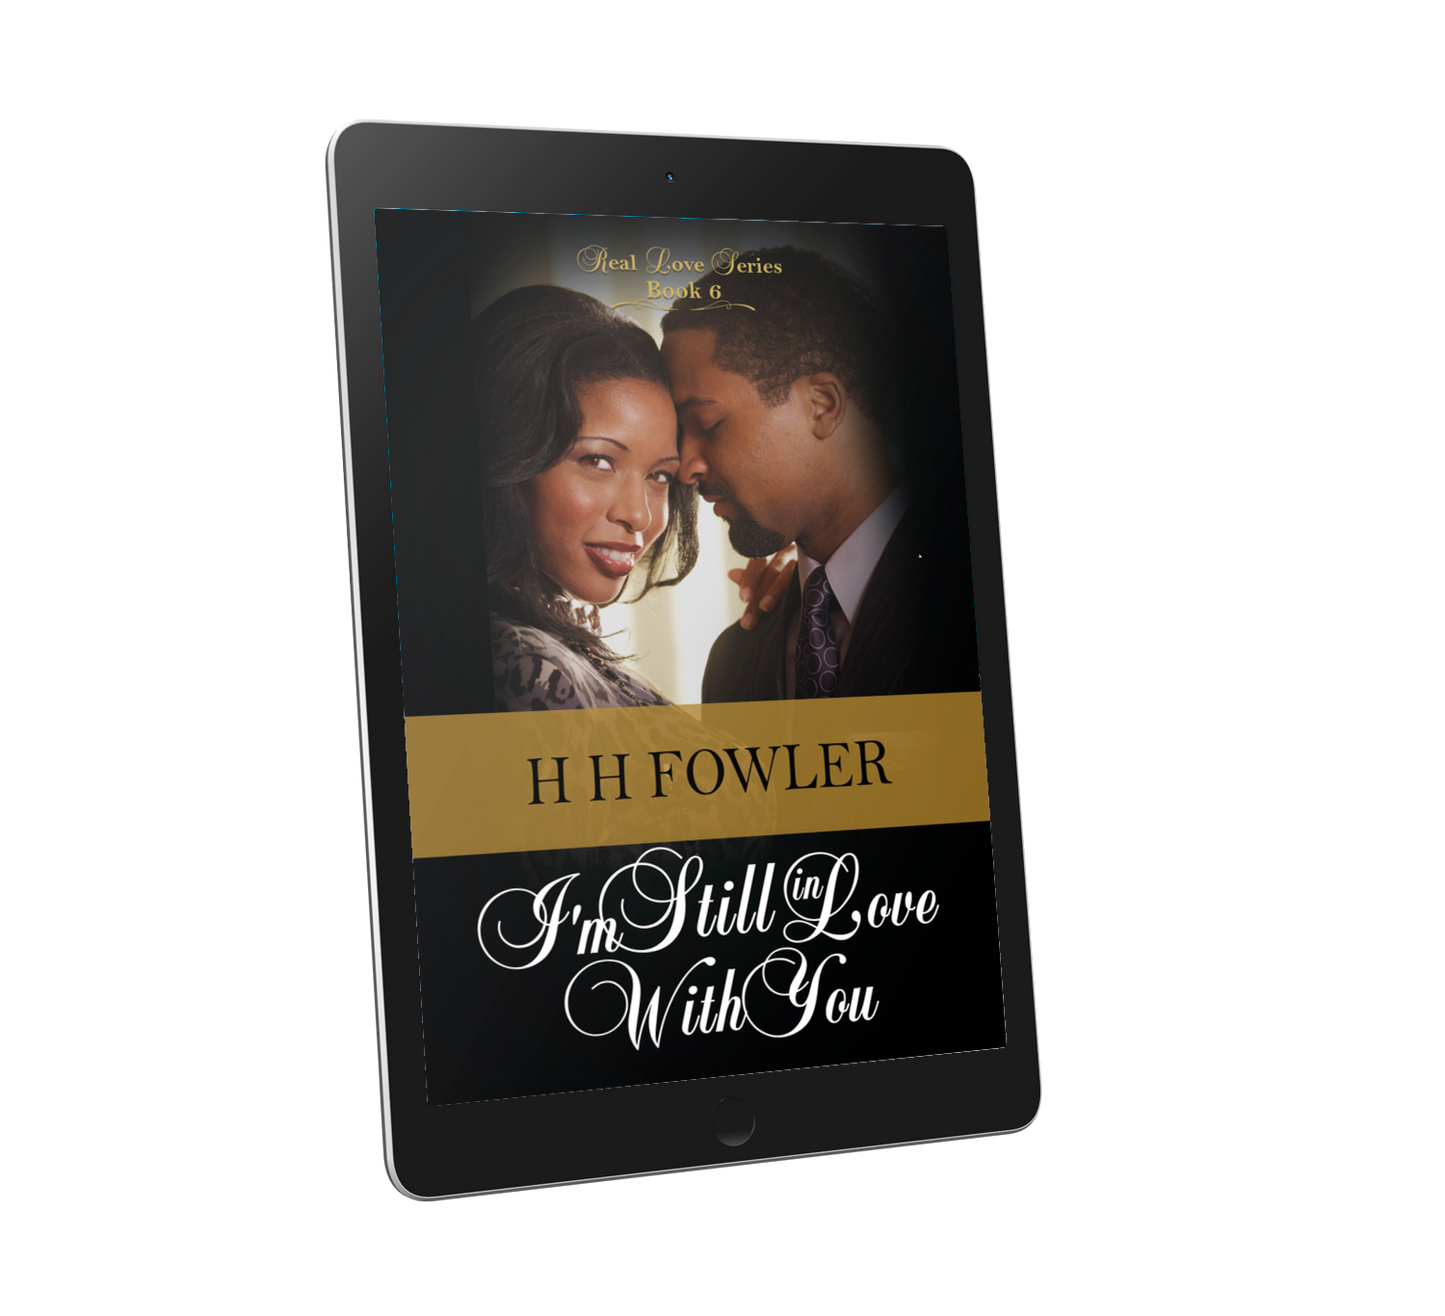 I'M STILL IN LOVE WITH YOU (REAL LOVE SERIES #6) EBOOK